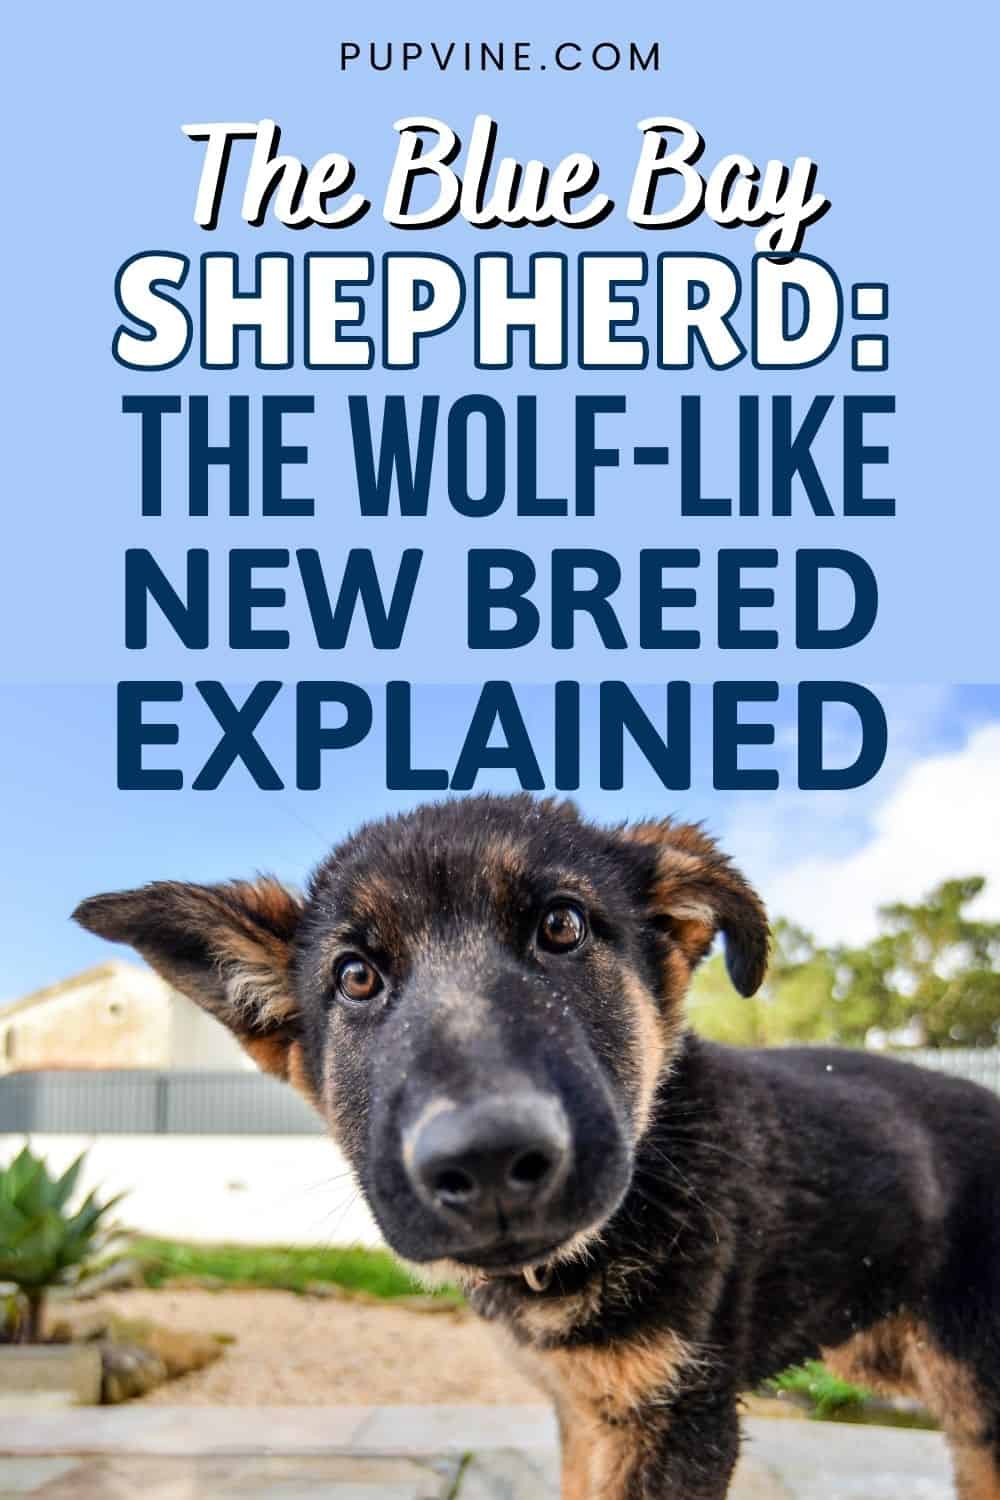 The Blue Bay Shepherd The Wolf-Like New Breed Explained